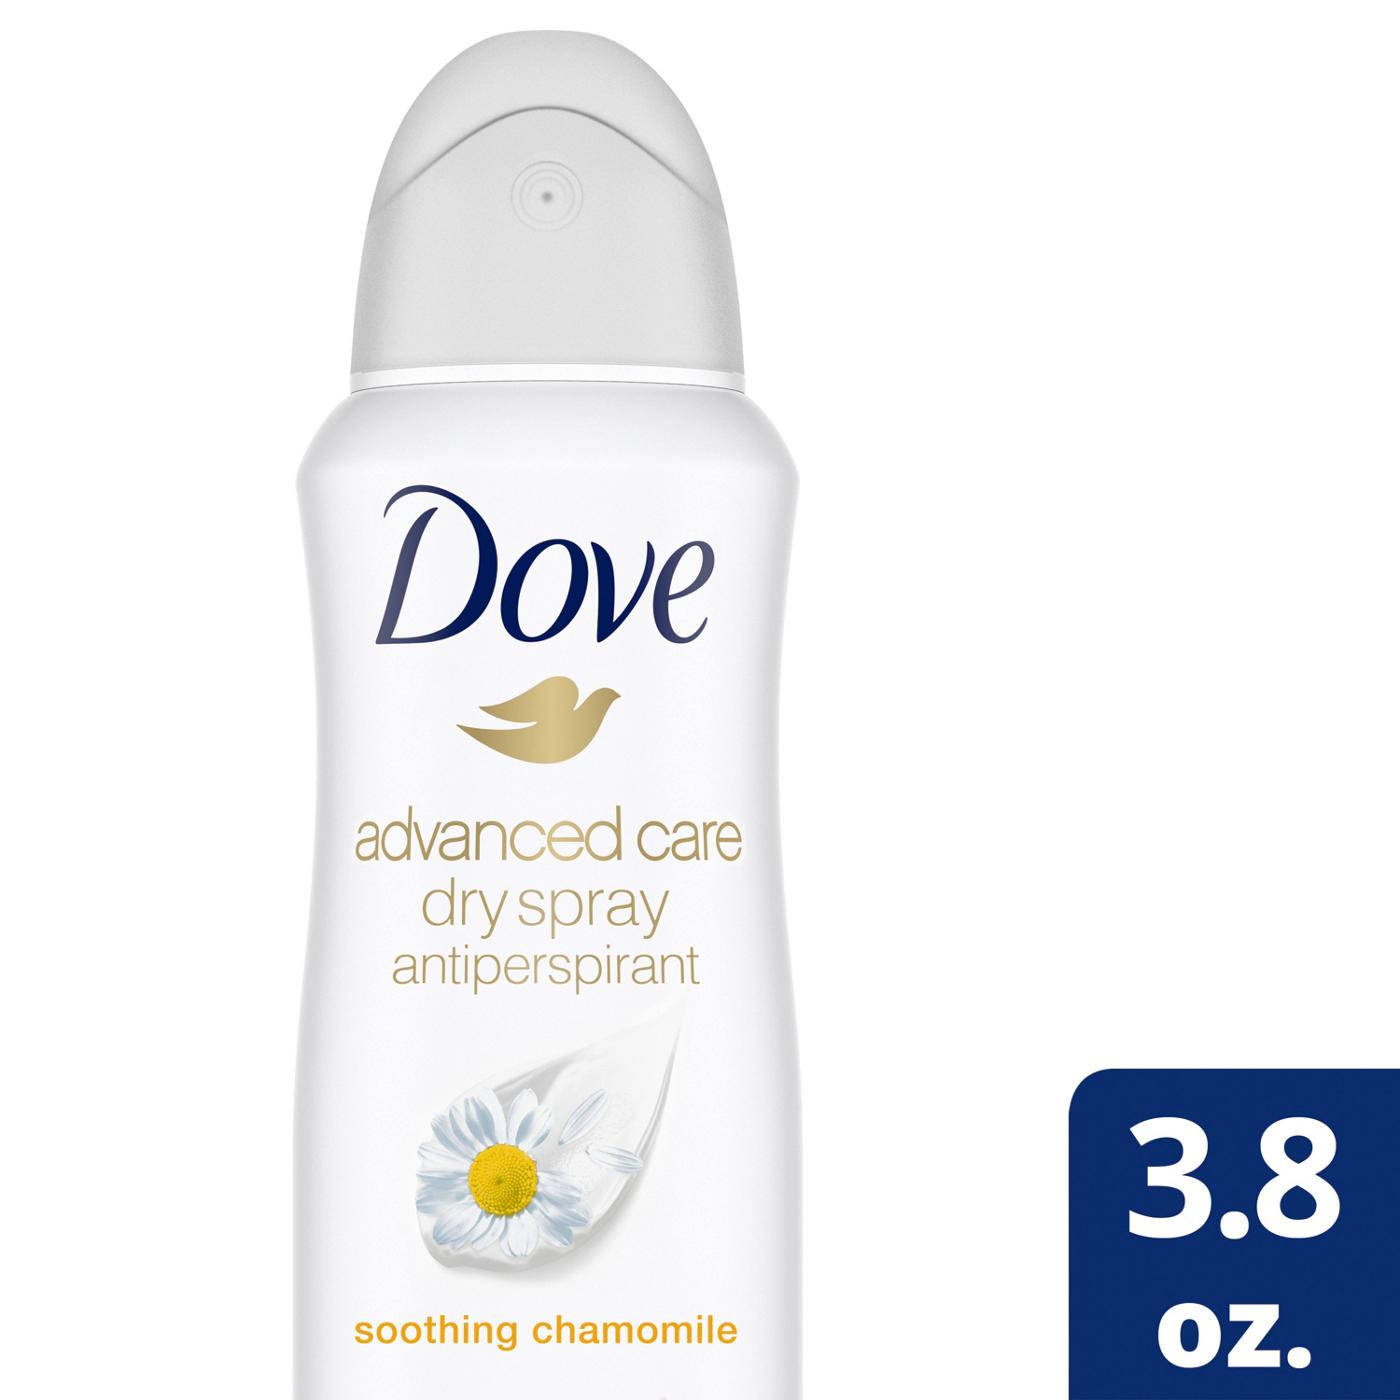 Dove Advanced Care Soothing Chamomile Dry Spray Antiperspirant Deodorant; image 2 of 3